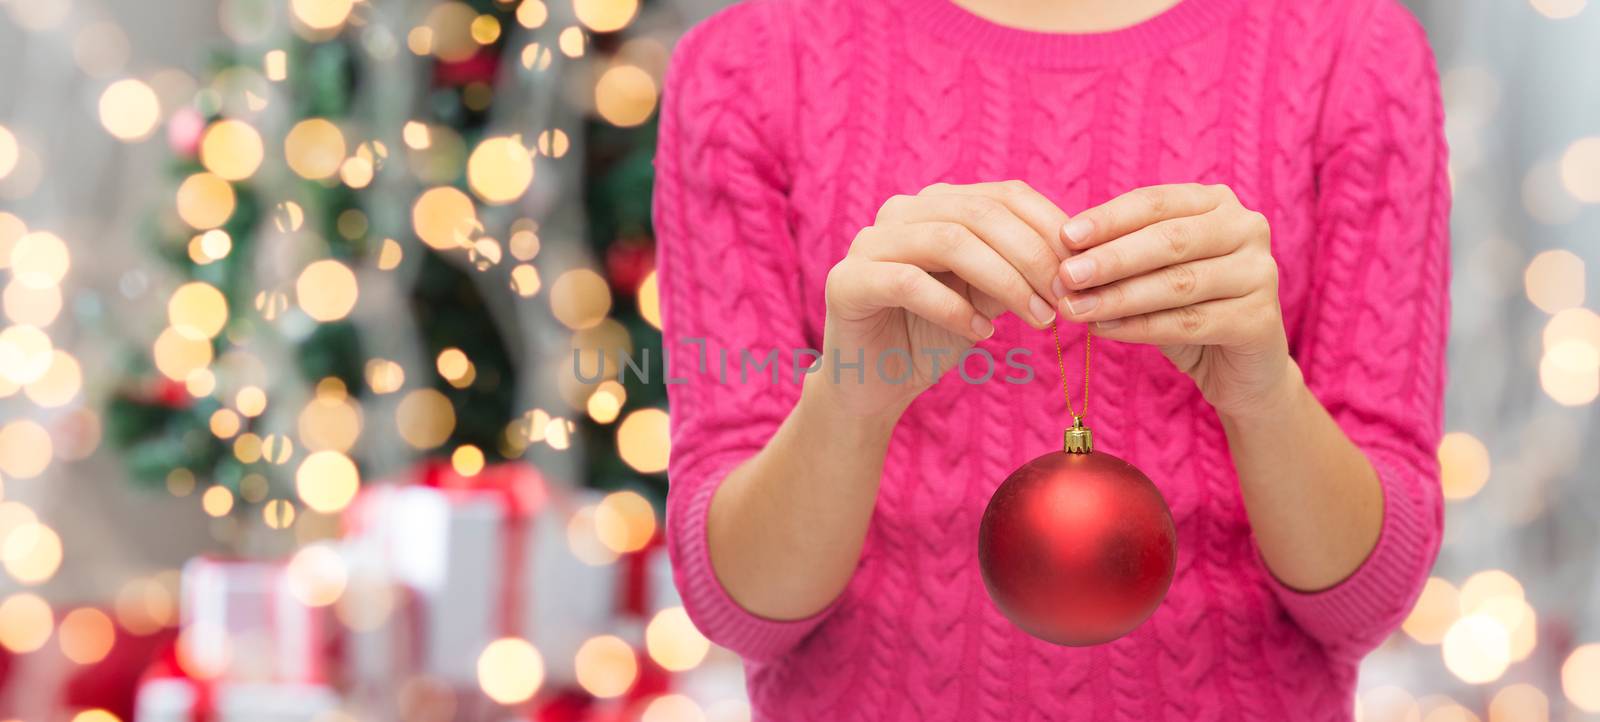 christmas, decoration, holidays and people concept - close up of woman in pink sweater holding christmas ball over tree lights background